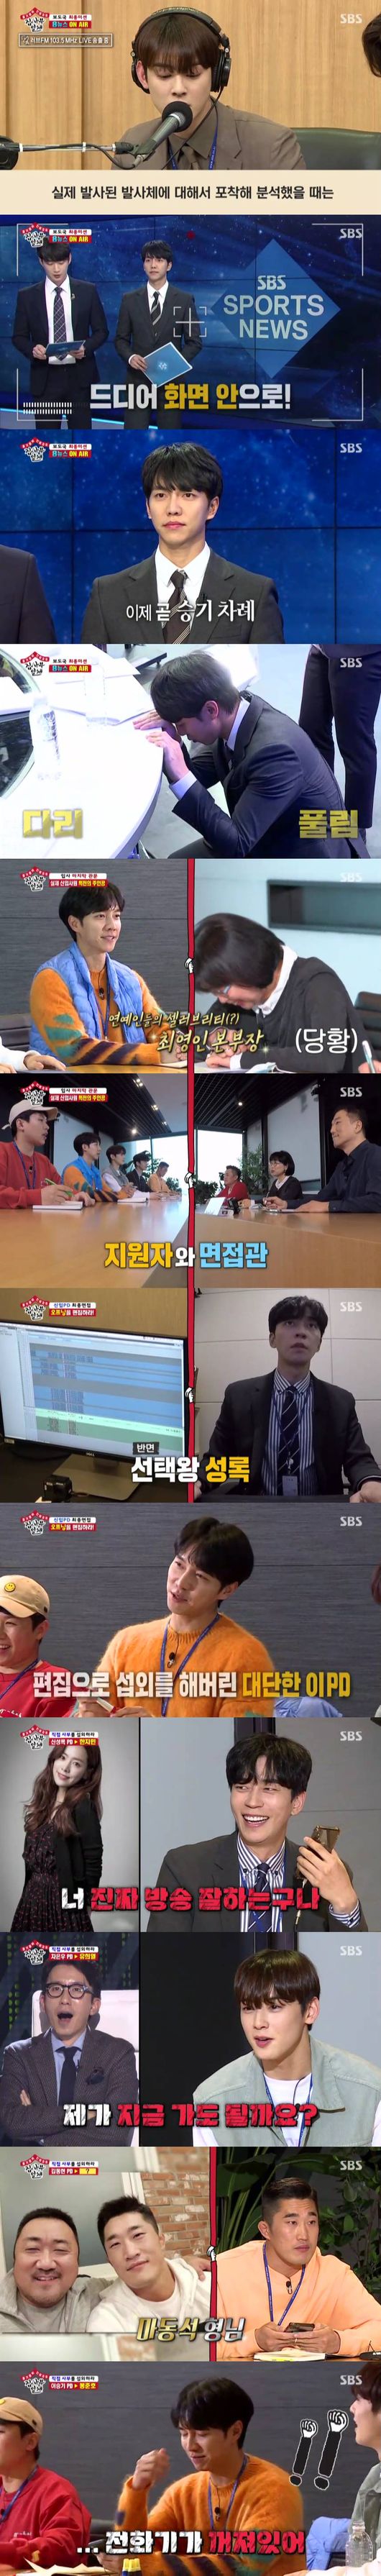 SBS All The Butlers Lee Seung-gi was skilled, and Cha Eun-woo was hired as a career PD and new employee with unlimited growth potential.According to Nielsen Korea, SBS All The Butlers, which was broadcast on the 26th (Sun), recorded 5.6% of households ratings and 3.2% of the 2049 target ratings, which are important indicators of the people concerned and lead the topic, (based on the second part of the metropolitan area).In addition, Yang Se-hyeong called to talk about Baek Jong-won as a master, and the highest audience rating per minute rose to 6.5% and became the best one minute.The show was decorated with a special feature of the broadcasting station 24 oclock, and Lee Seung-gi, Shin Sung-rok, Yang Se-hyeong, Cha Eun-woo and Kim Dong-Hyun were shown to experience the broadcasting station.Lee Seung-gi challenged the SBS 8 News sports news. Kim Yoon-sang said, The prompter may be turned off today.I have to be careful like that. He made Lee Seung-gi nervous.In fact, Lee Seung-gi was preparing for the live broadcast on the day, and the news order was changed on the spot because of the breaking news that the opening day of the Tokyo Olympics was confirmed.Lee Seung-gi, who seemed nervous, repeated the practice until just before the live broadcast, and succeeded in Re-Ment perfectly as if he was nervous and impressed me.Cha Eun-woo, who was in charge of radio news broadcasts, also calmly finished radio broadcasts.The interviewees included Choi Young-in, head of the entertainment division, Park Sung-hoon CP, and Kwak Seung-young CP.The first task of the final interview was editing the opening video of All The Butlers.Lee Seung-gi was difficult to cut Choices, while Shin Sung-rok, a sincere, boldly cut Choices and continued editing at a rapid pace.Yang Se-hyeong edited the video by evaluating his Re-Ment, while Cha Eun-woo and Kim Dong-Hyun continued editing self-centeredly.Before the release of the video, Park Sung-hoon CP said, There is no correct answer, but there is a wrong answer. Then, five members editorial videos were released.First, the self-centered Cha Eun-woo video was released, and Kwak Seung-young, CP, said, The theme consciousness is excellent.I did not see anything except Cha Eun-woo Lee Seung-gi, in the meantime, made me laugh at interviewers by creating a scene where Cha Eun-woo wants to fix All The Butlers with Devils Editing.After watching the video, Choi Young-in, director of the entertainment division, explained the purpose of the project, saying, I wanted to let you know that it takes a lot of time and effort to edit a short time.The second task was to direct the master. Choe Yeong, general manager, said, We are meeting each others needs.We really want to think about what we need from the position of the person, he said.The members who were embarrassed by the unexpected task were mobilized to mobilize their personal connections.Shin Sung-rok called actor Han Ji-min, Cha Eun-woo called Yoo Hee-yeol, and Kim Dong-Hyun called Ma Dong-seok.They persuaded their opponents actively and enthusiastically to laugh, and they led to praise from interviewers with a convincing appearance.Lee Seung-gi contacted Bong Joon-ho, but unfortunately the phone was off; Lee Seung-gi, however, left a clear and coherent voice message and caught his eye.Yang Se-hyeong called Baek Jong-won, who is appearing on SBS Maman Square together.Yang Se-hyeong persuaded Baek Jong-won, saying, I called the SBS intern Yang Se-hyeong PD, not the handmade Yang Se-hyeong.What am I? Baek Jong-won said to the continued persuasion of Yang Se-hyeong, I can not say Do not laugh when you talk like this.I think its a good idea, so lets worry about it. He also invited the members to his house.This scene, in which Yang Se-hyeong spoke with Baek Jong-won for the masters appointment, gave both pleasure and anticipation and won the best one minute with a 6.5% audience rating per minute.Finally, the final results were announced: Mr. Lee Seung-gi was the most experienced, and Mr. Cha Eun-woo grew up in a short period of time, said Choe Yeong, general manager.He said, I saw the possibility of growth, he said, Cha Eun-woo is a new PD, and skill is also very important. Lee Seung-gi said he would hire as a career PD, and Cha Eun-woo and Lee Seung-gi hugged each other